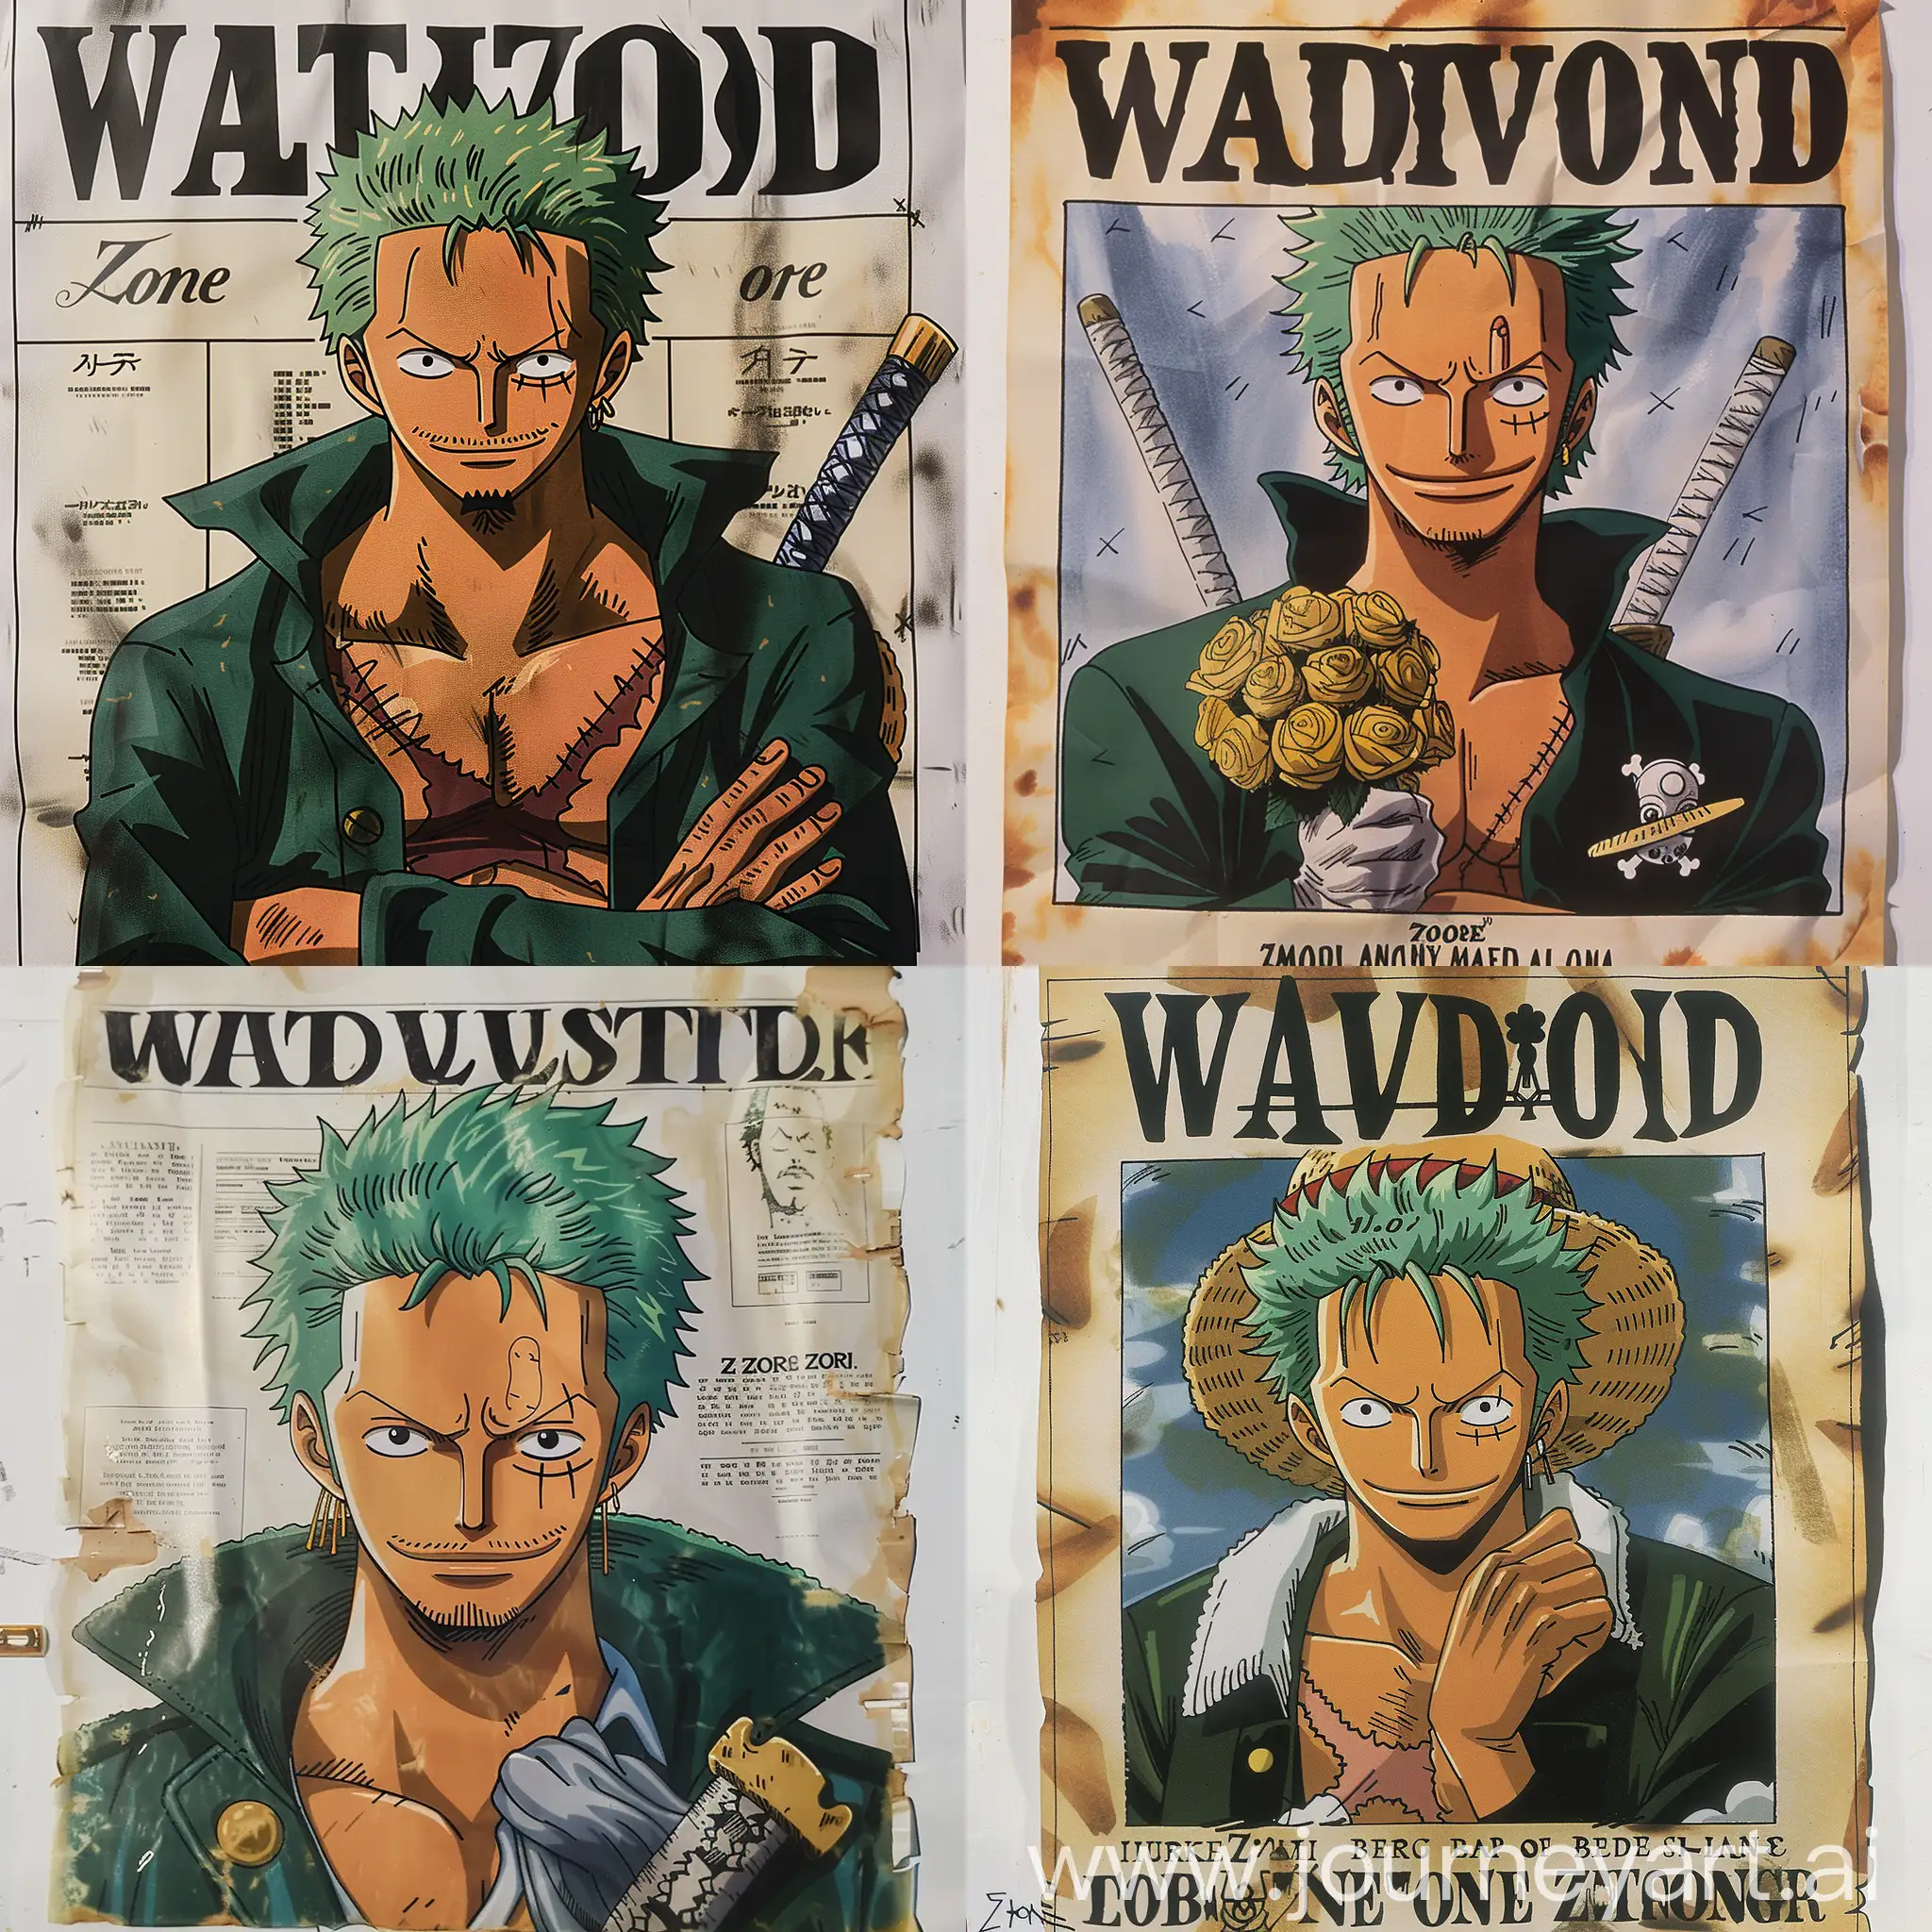 Zoro from One Piece in a wanted poster. Zoro is wearing a groom's outfit because he is getting married